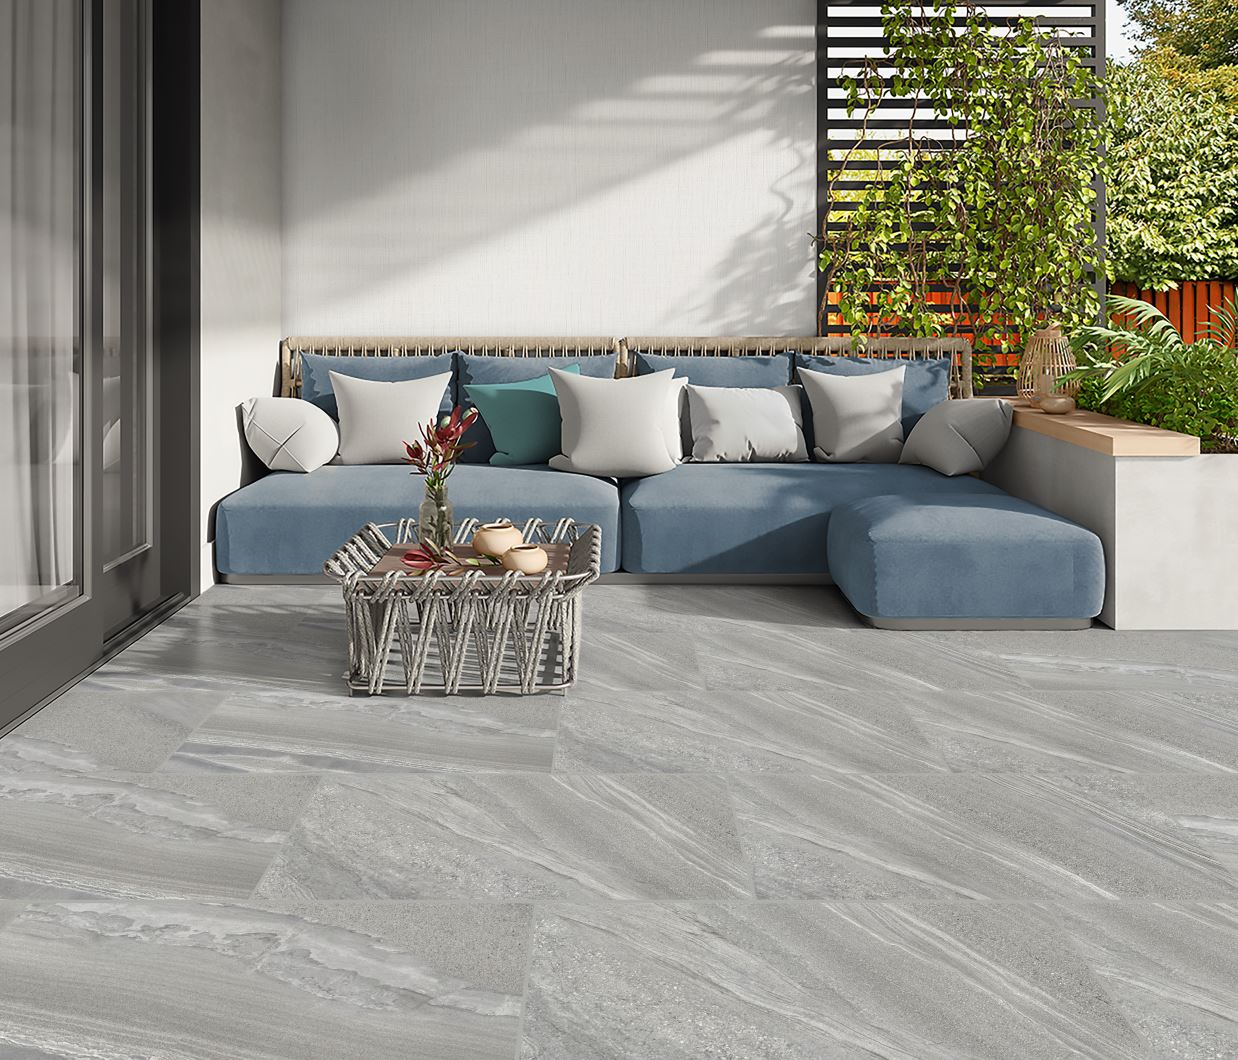 Crossover Grey Outdoor Porcelain Paving Tiles - 900x600 - 20mm